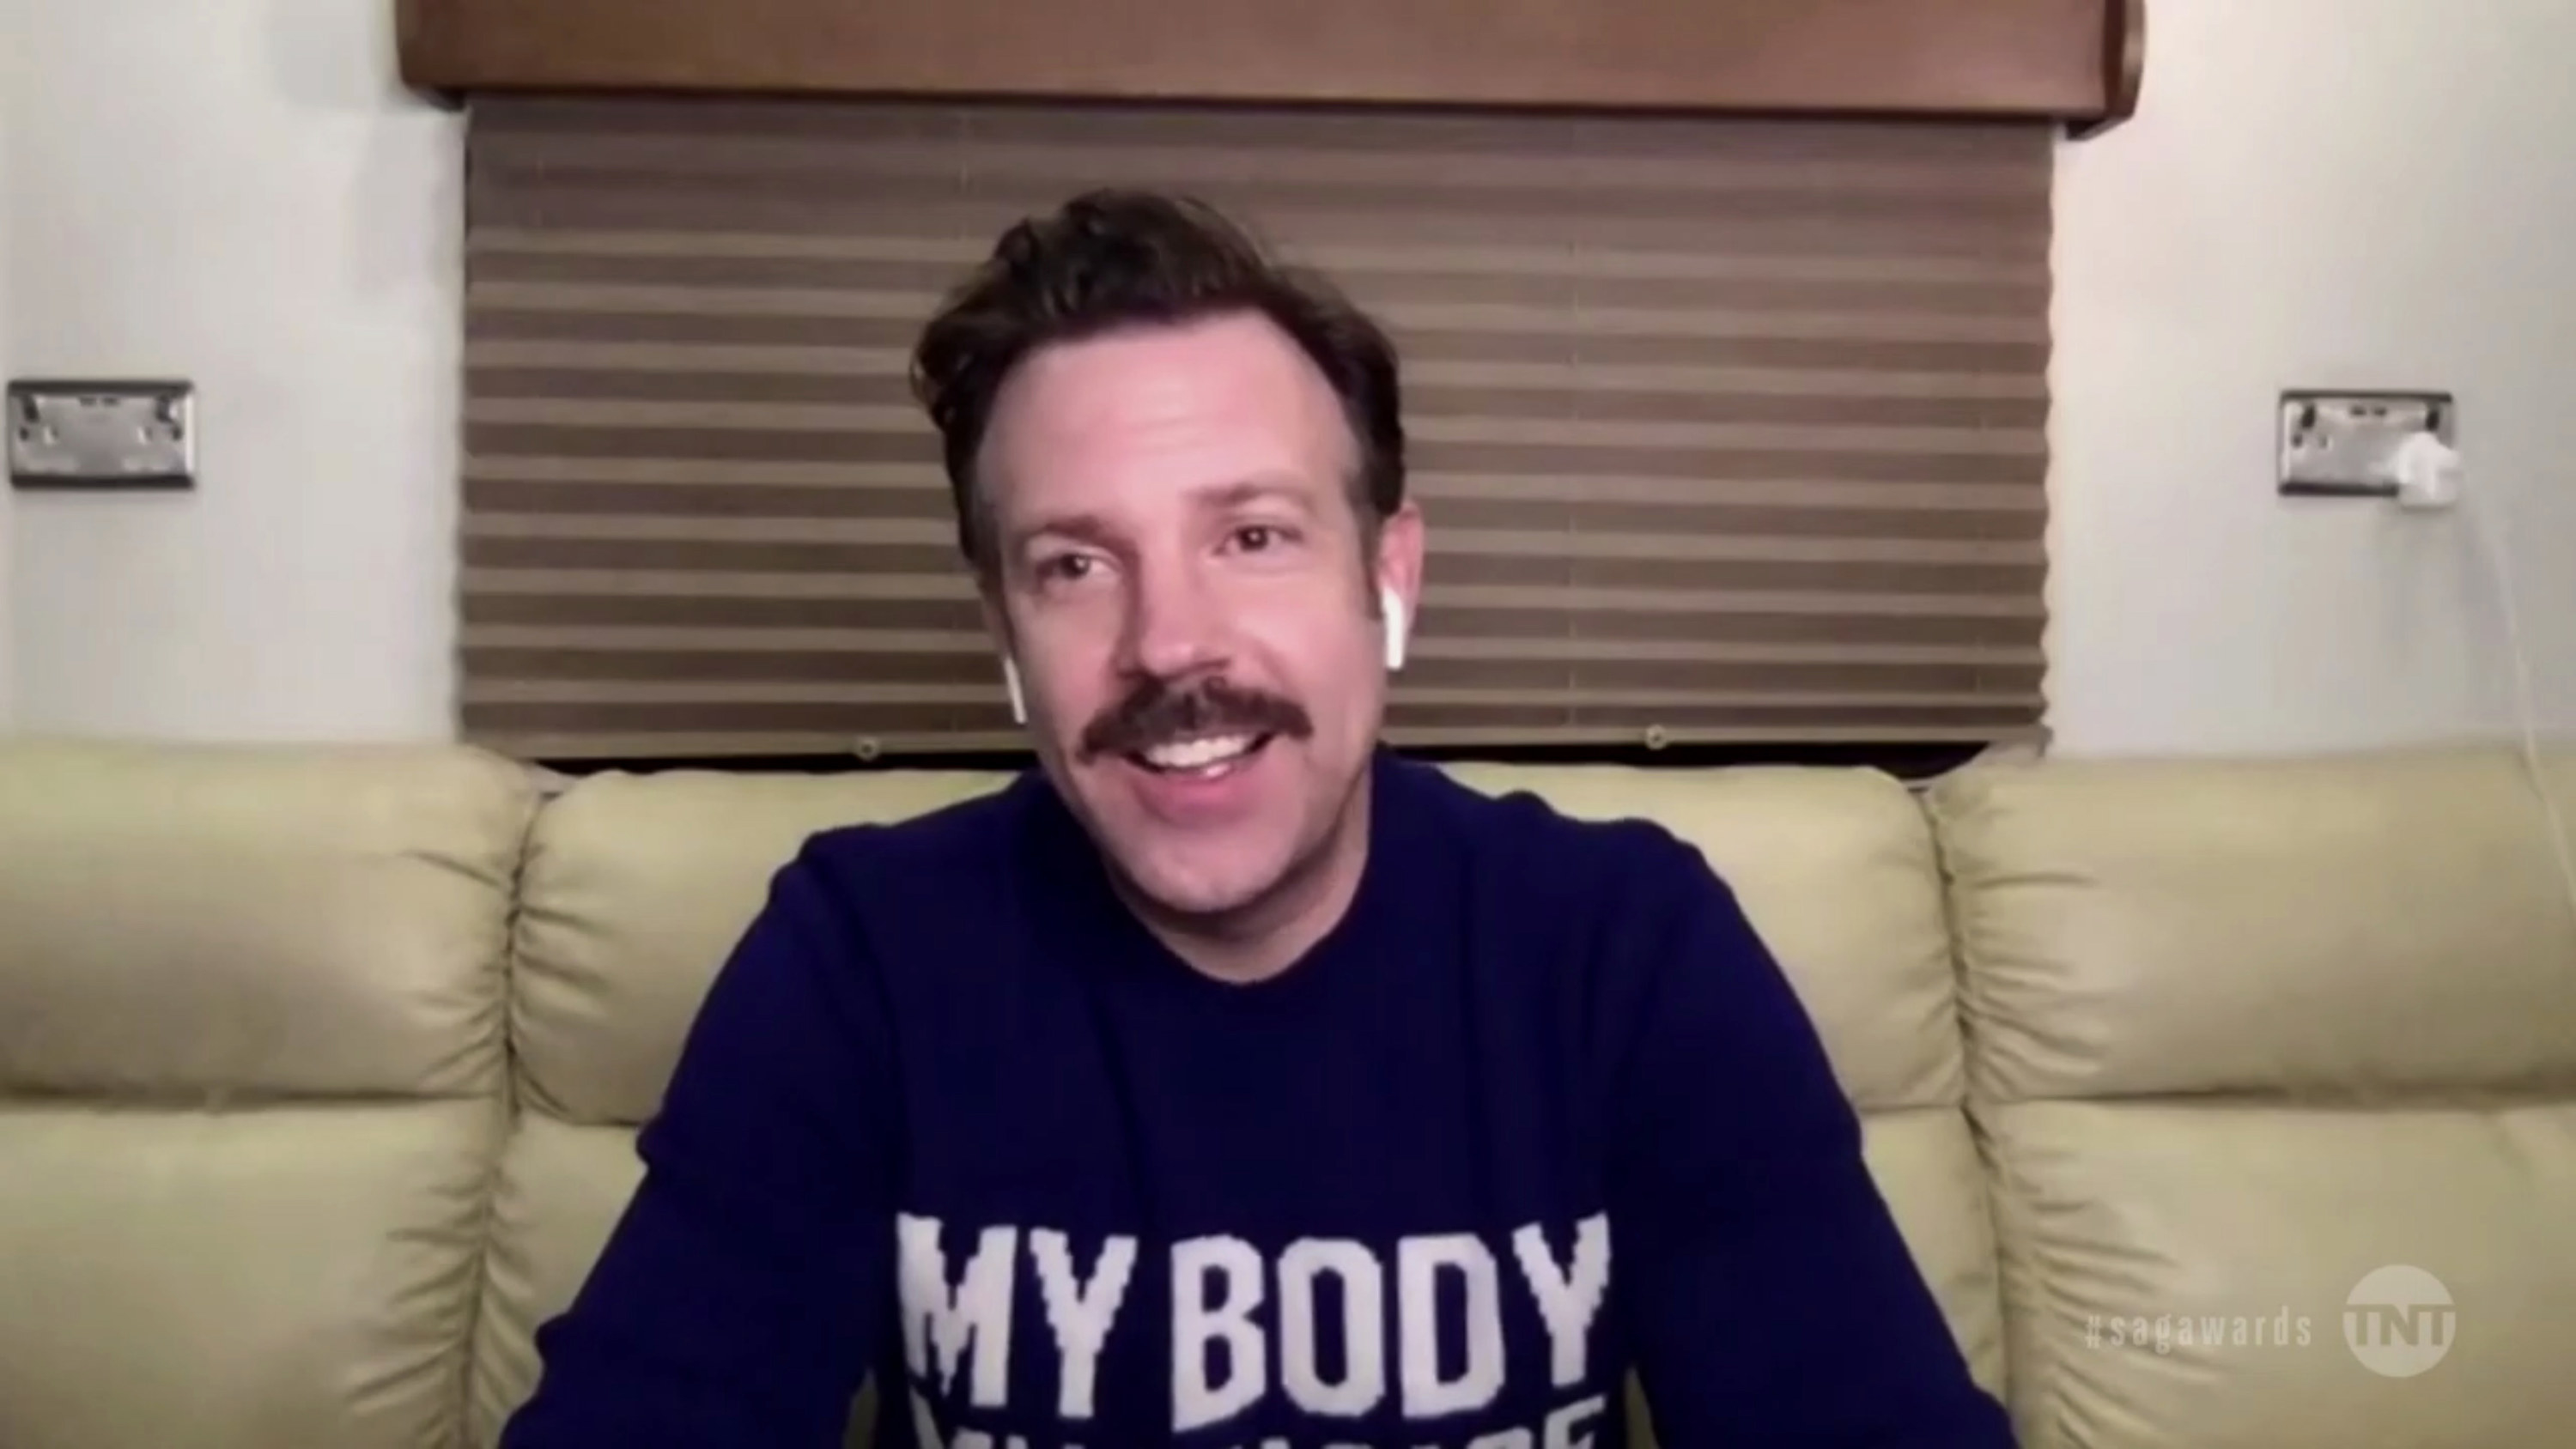 Sudeikis wears a &quot;My Body My Choice&quot; shirt and AirPods while sitting on a sofa